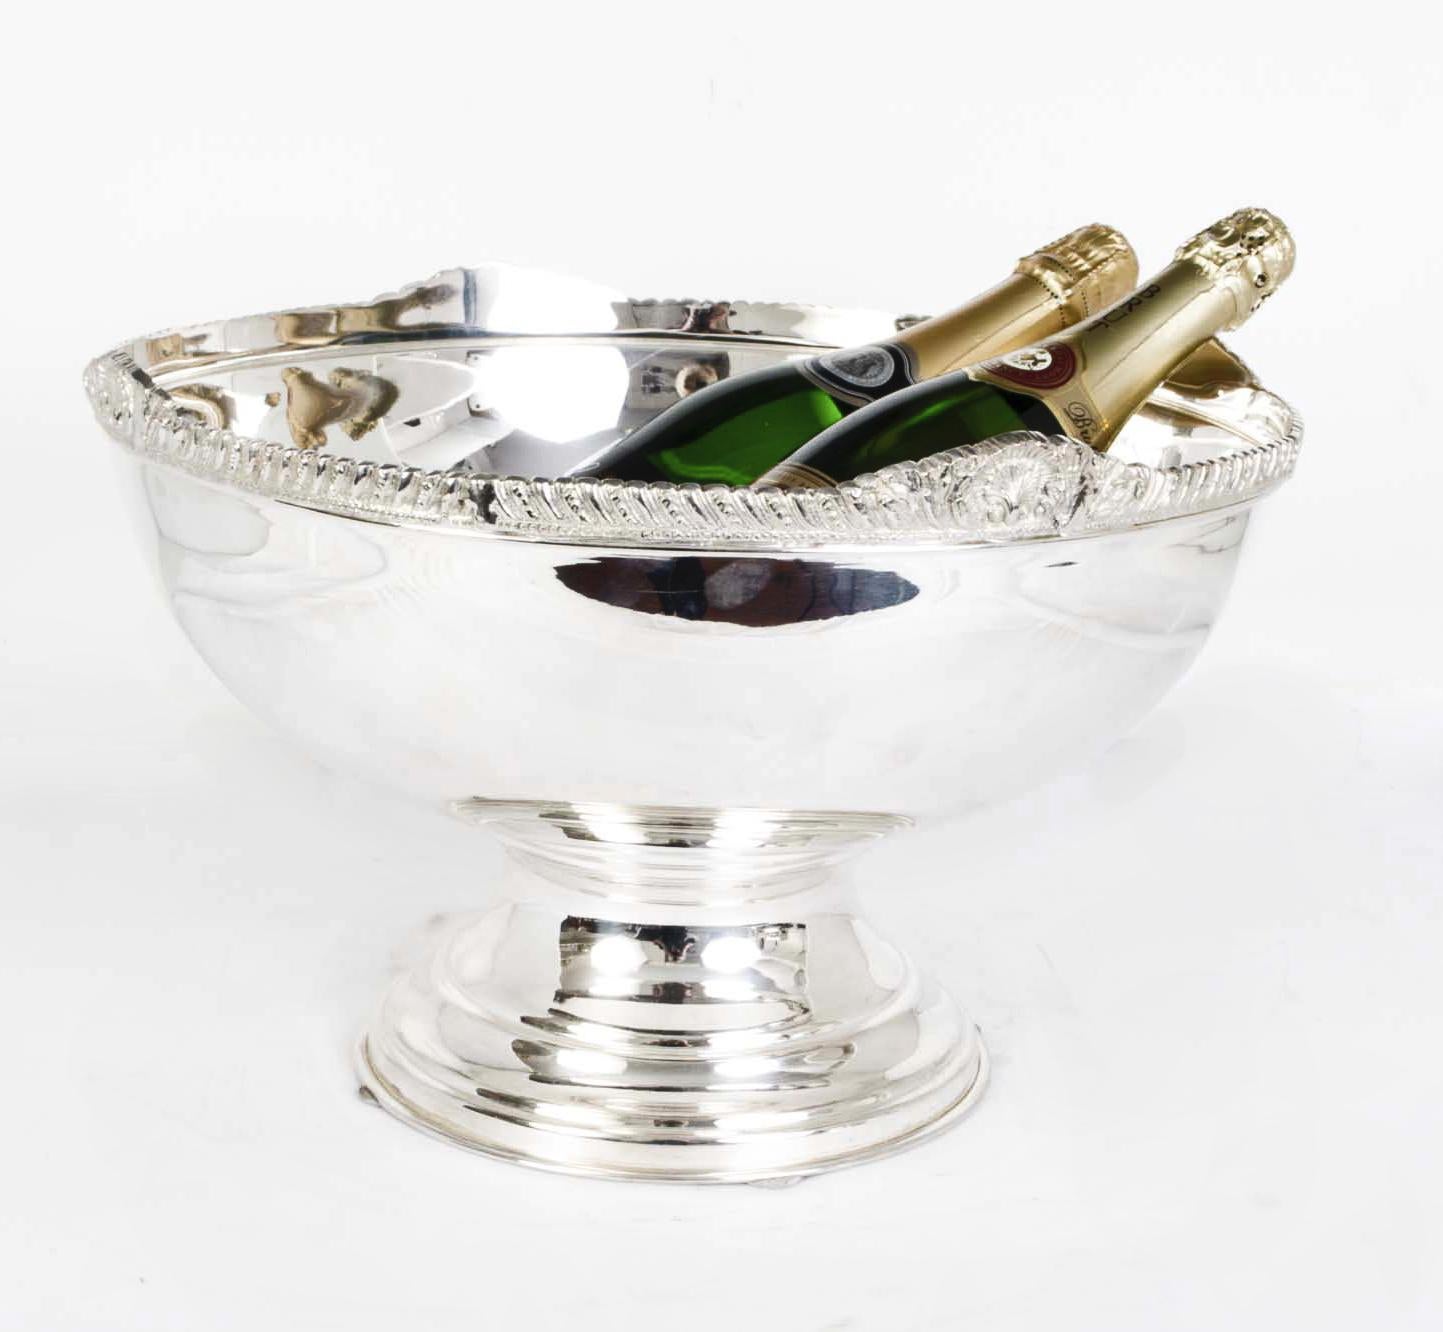 This is a beautiful large vintage silver plated champagne cooler that can acommodate 6 bottles with ease.

The quality and craftsmanship are superb and the bowl features beautiful gadrooned decoration around the top.

Add a touch of style to